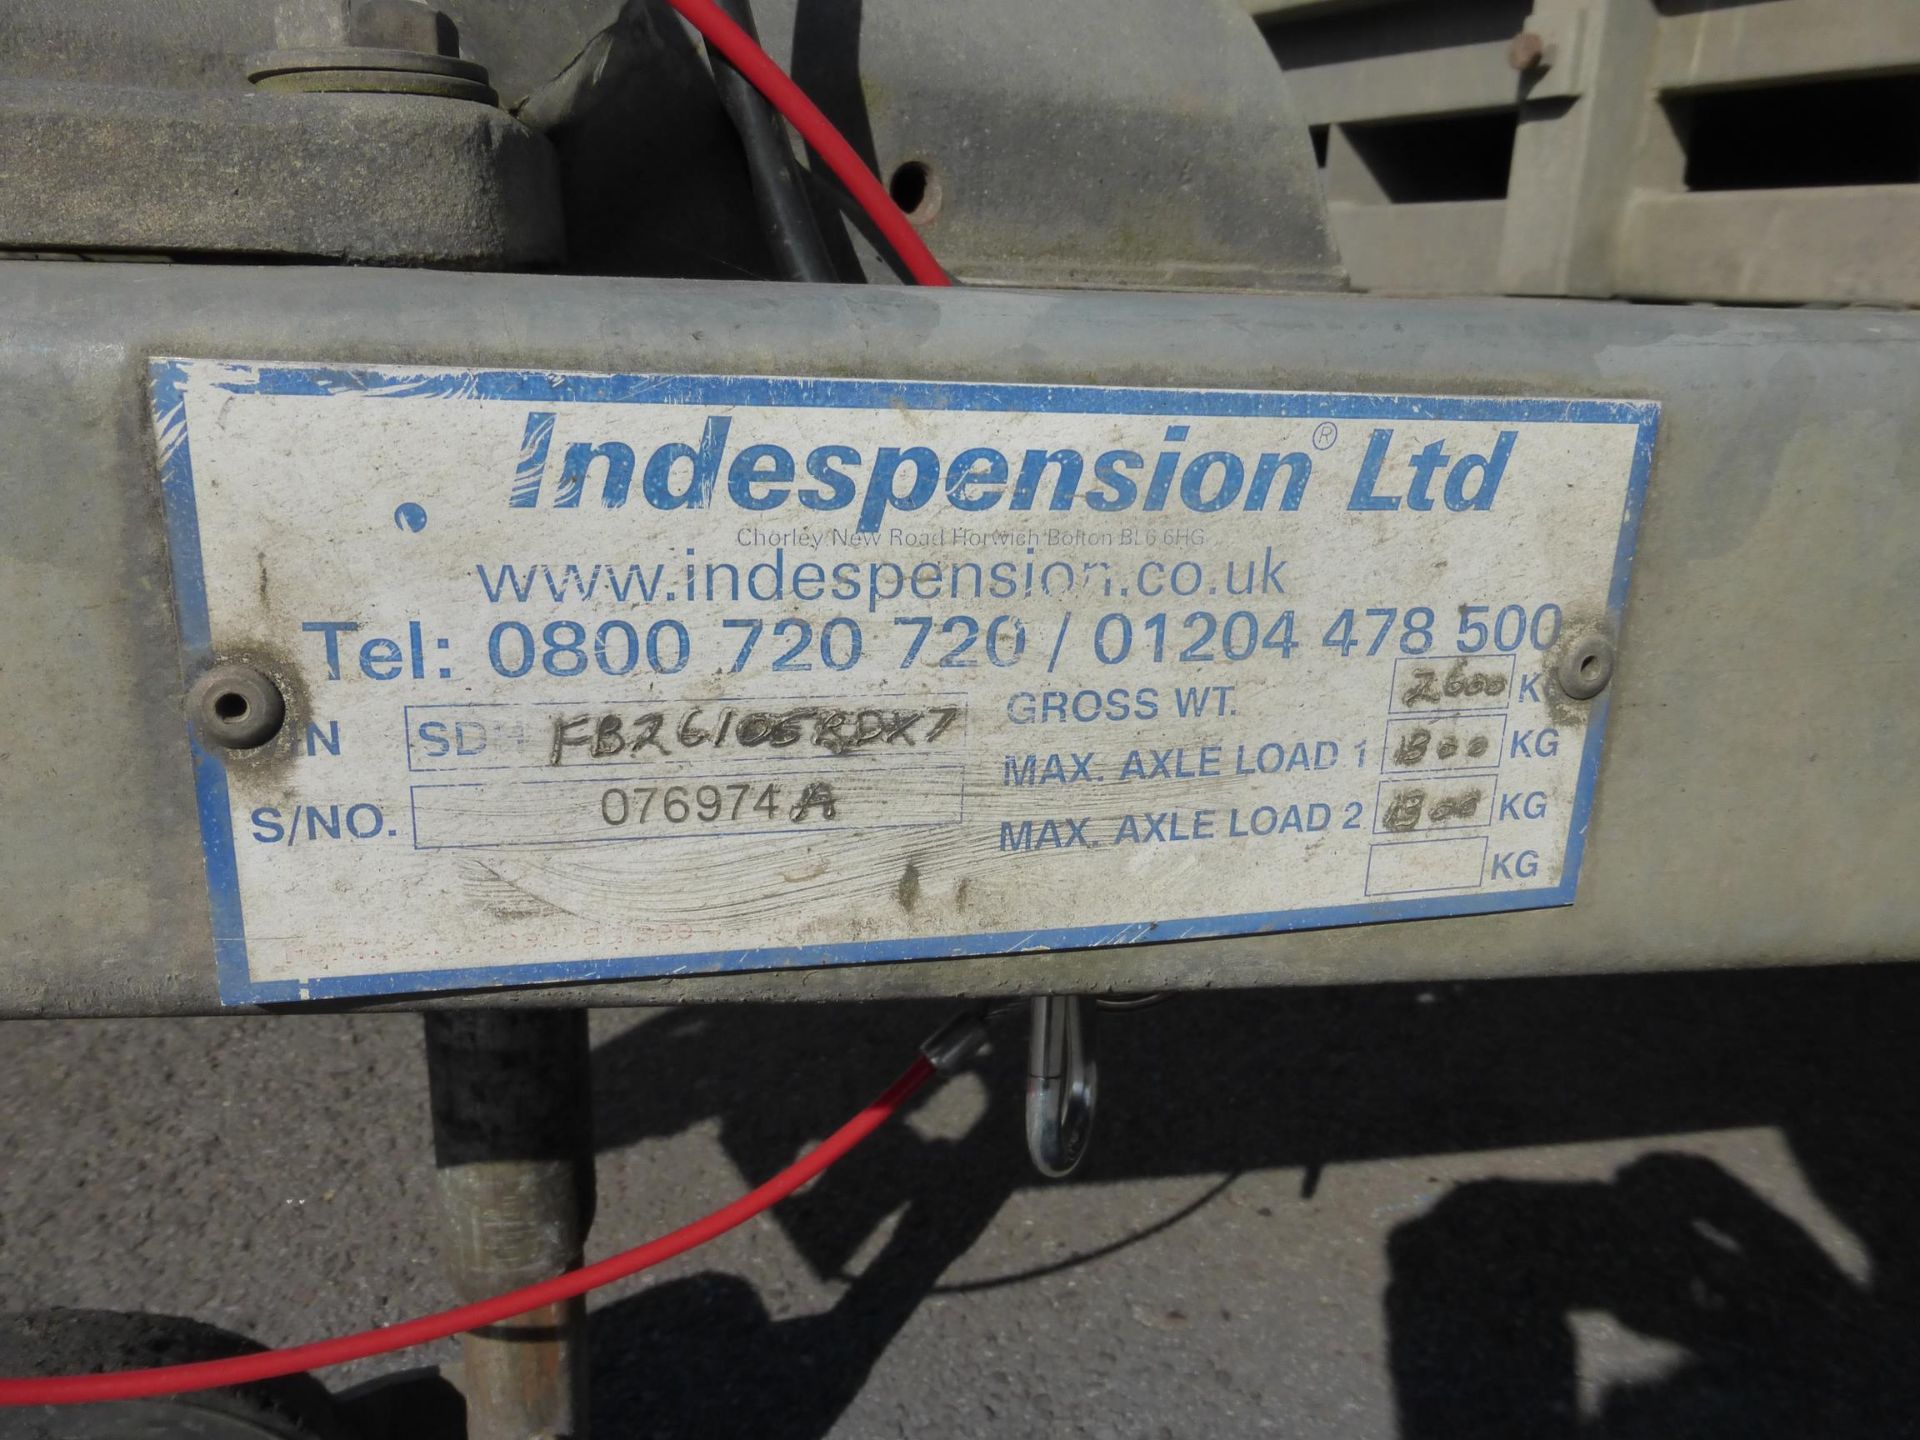 Indespension FB26 Galvanised Twin Axle Drop Side Plant Trailer, S/N: 076974A, GWT 2600Kg, 3m x 1.68m - Image 7 of 8